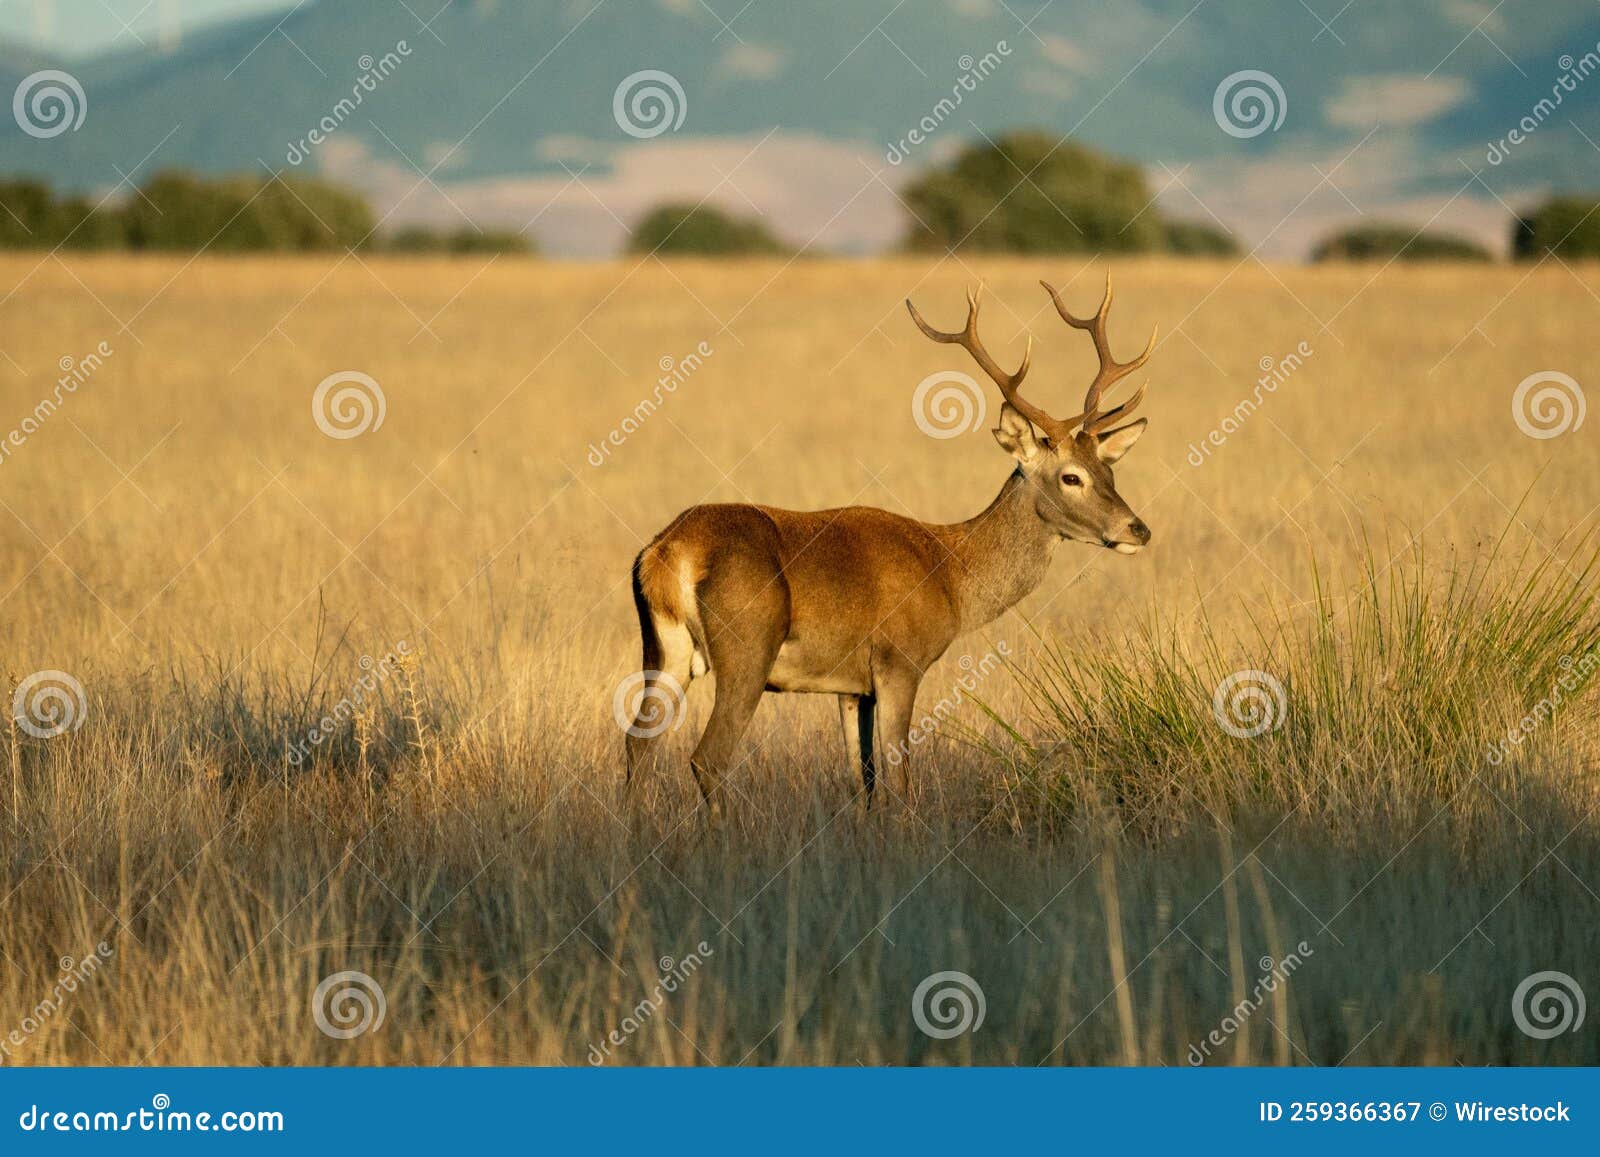 beautiful shot of a deer on the grass field of cabaneros national park in montes de toledo, spain